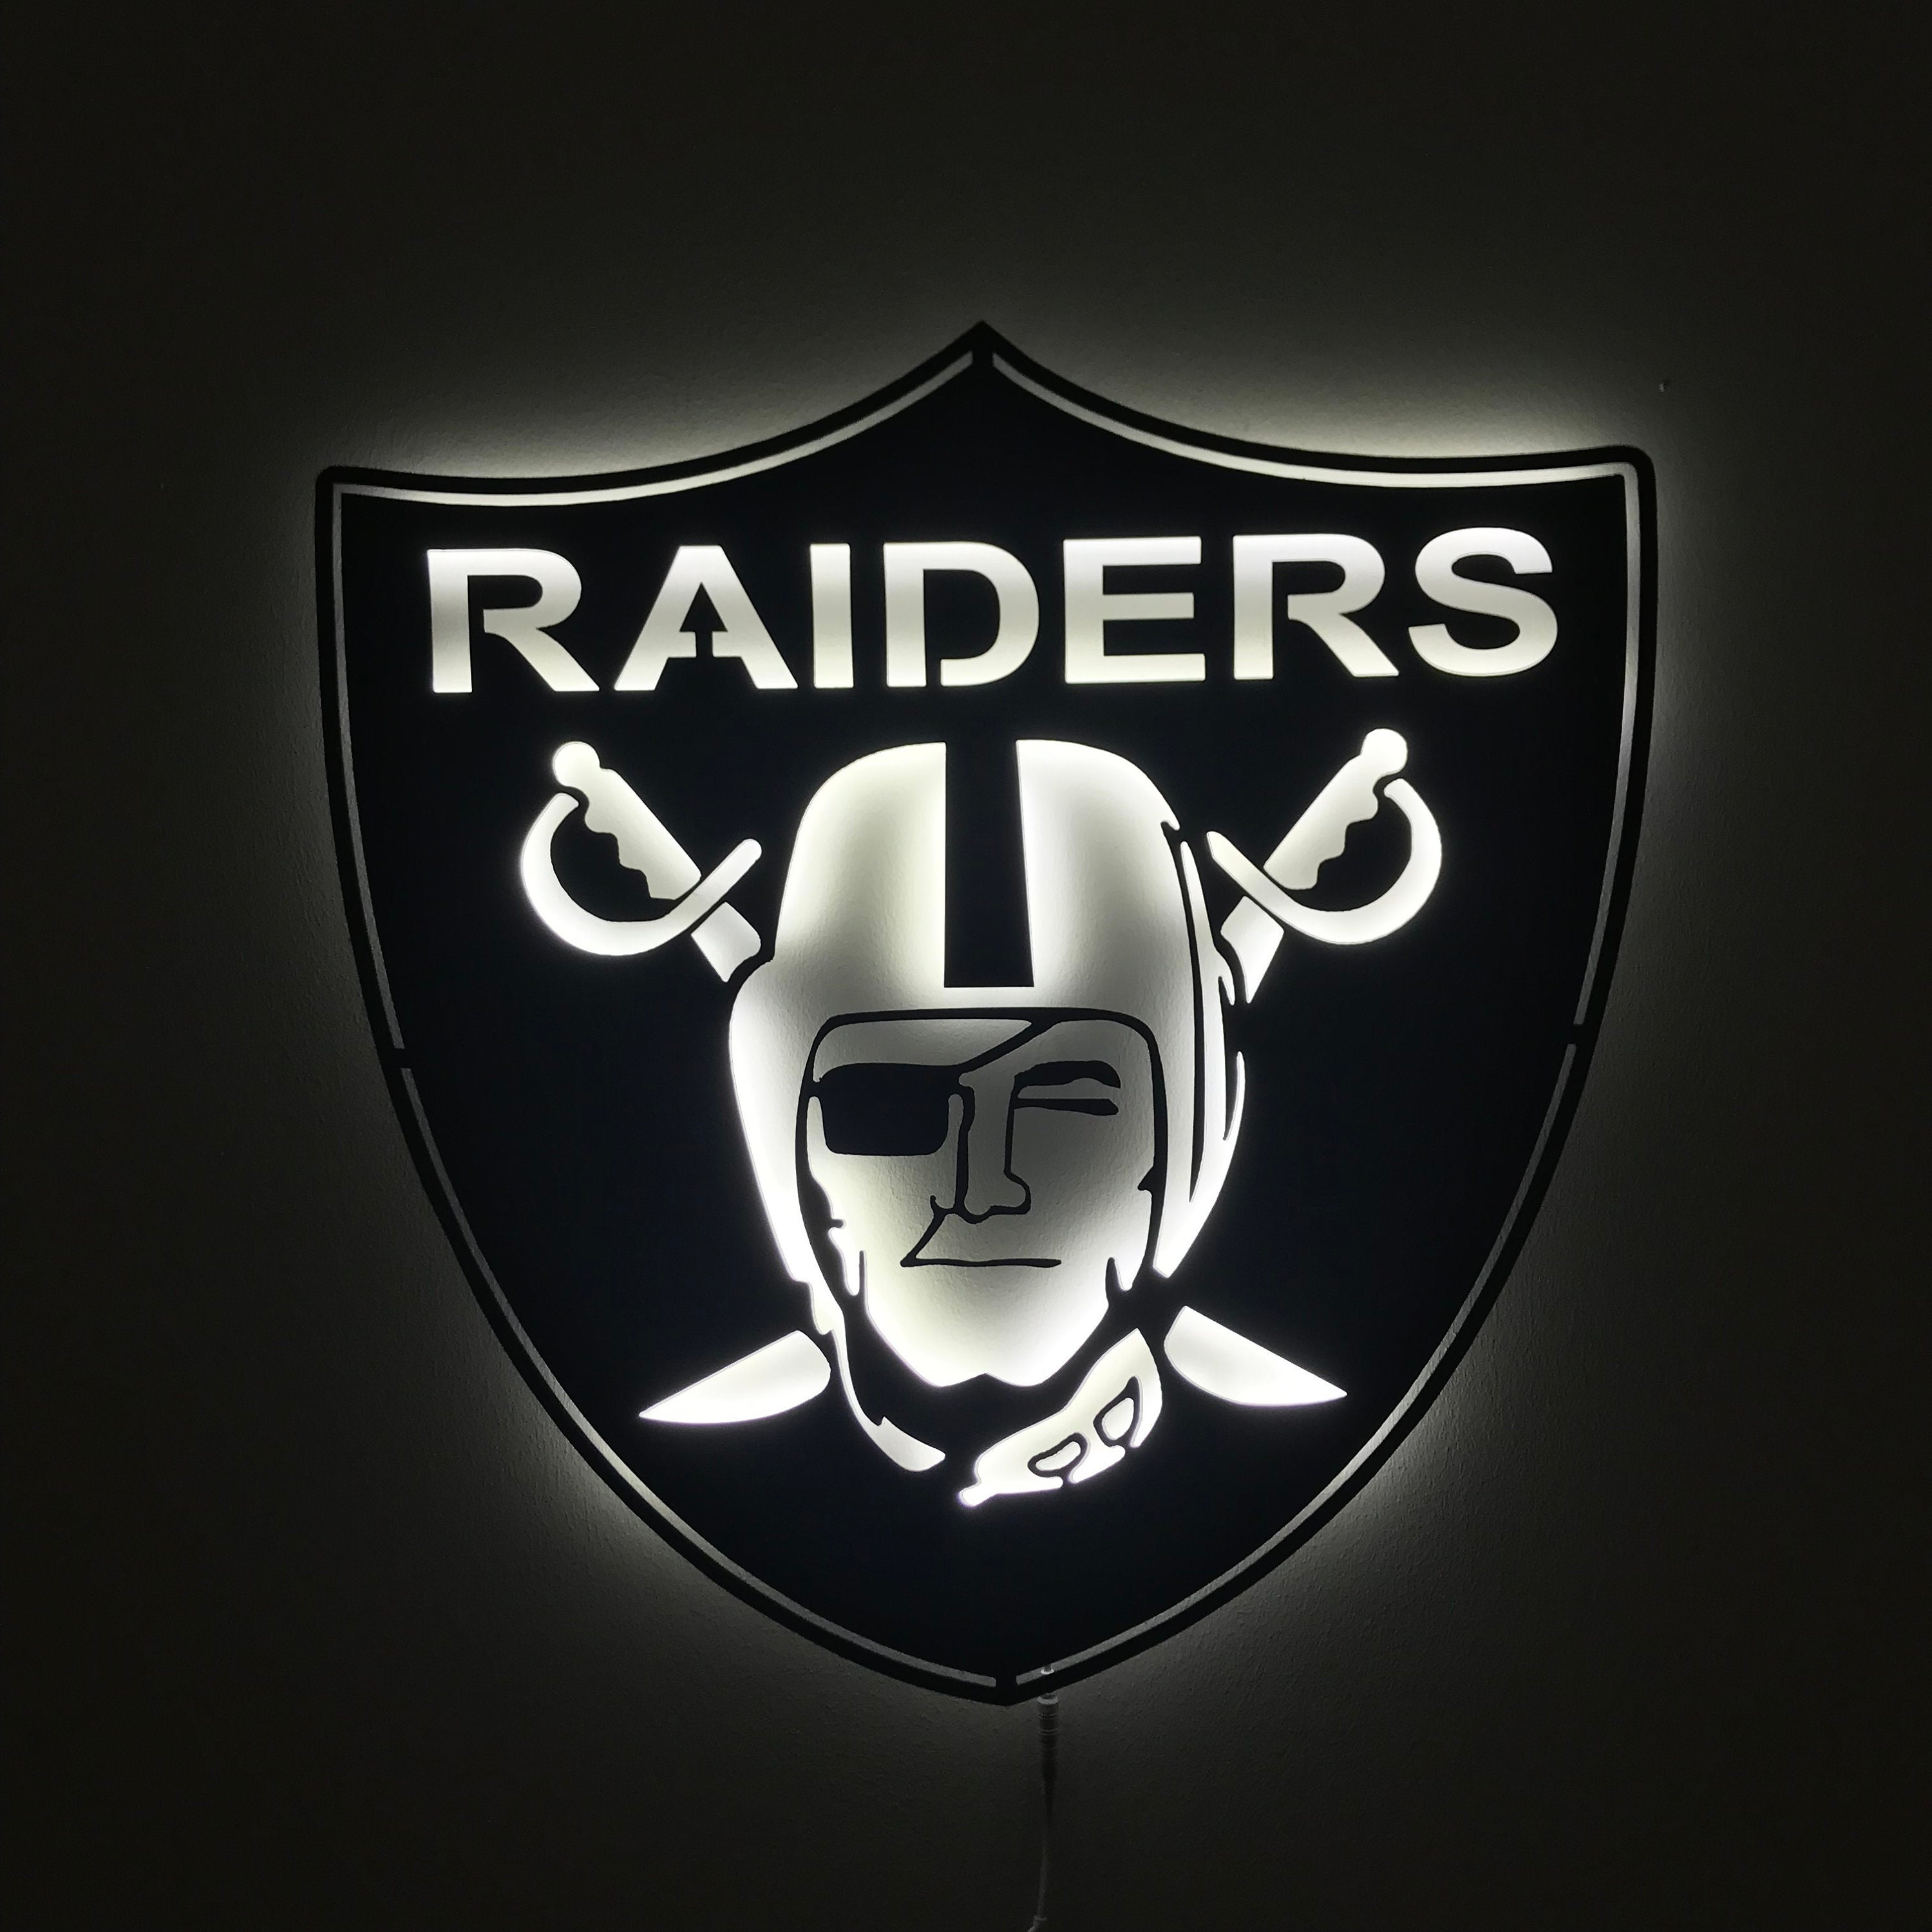 NFL Las Vegas Raiders Grilling Zone Metal Sign - The Whiskey Cave